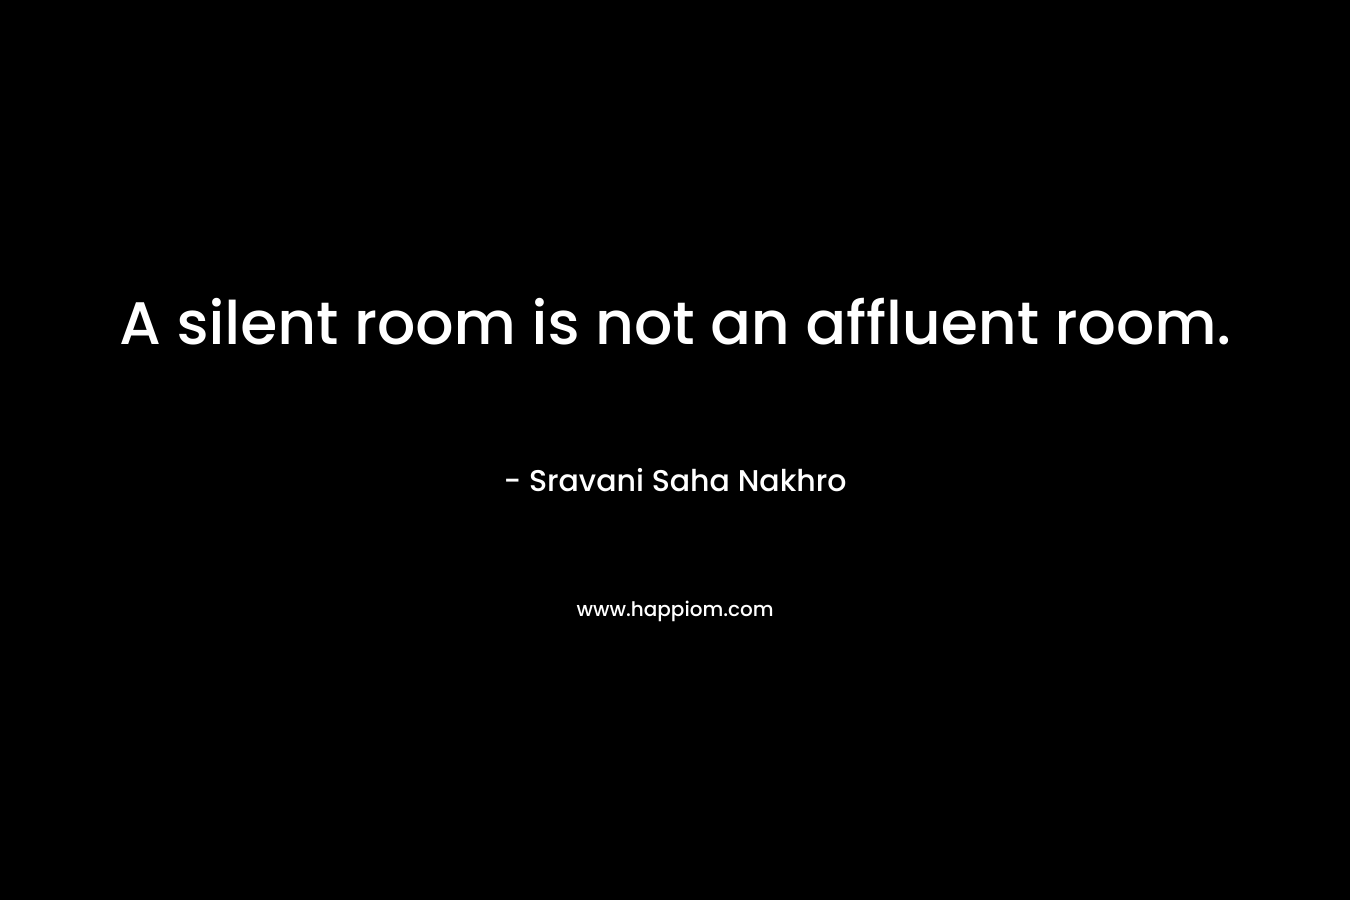 A silent room is not an affluent room.